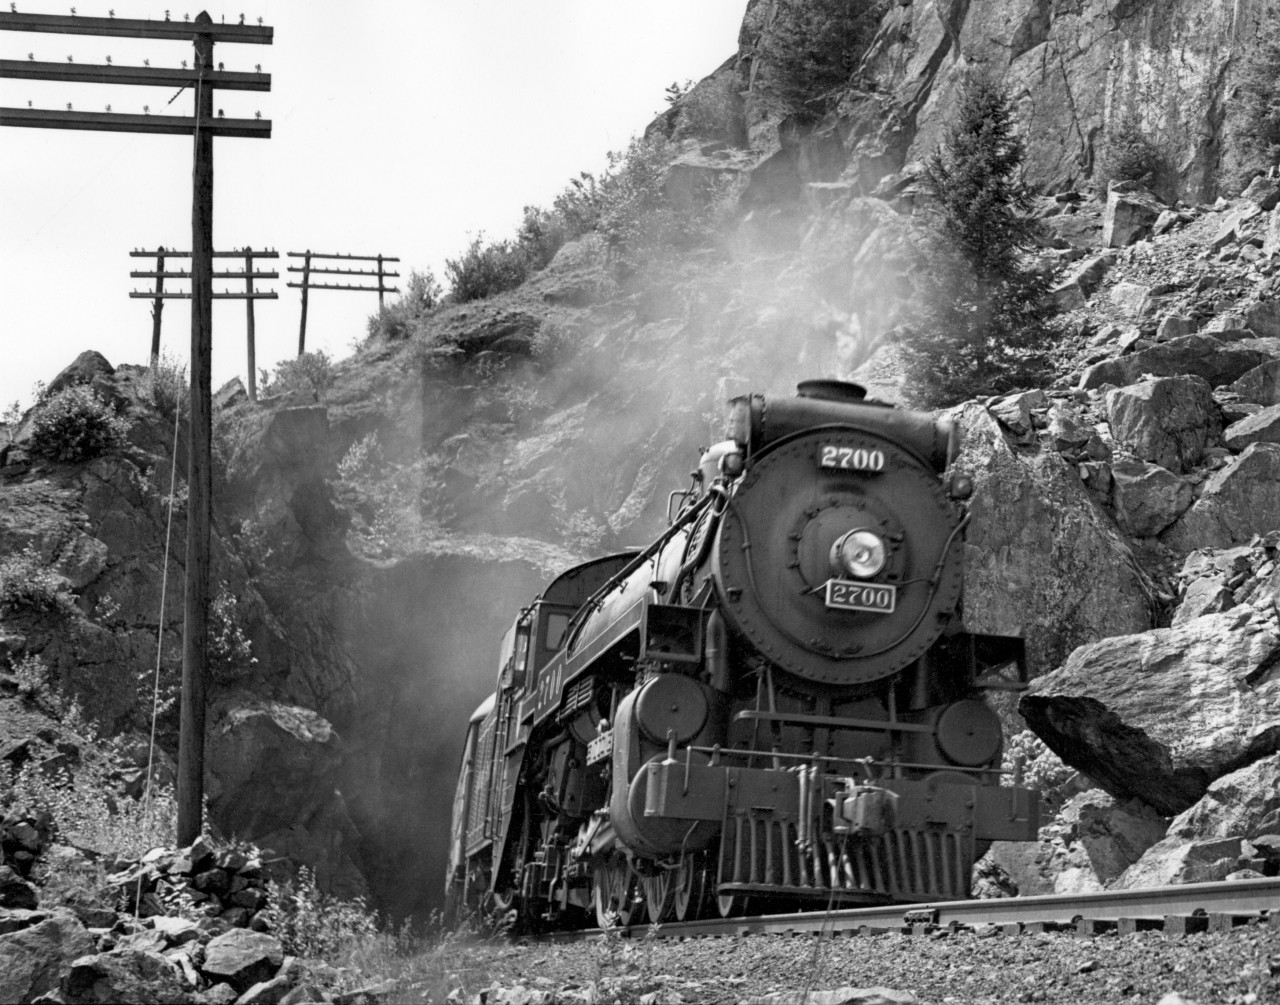 First section of train no. 2 with engine 2700 at Harrison tunnels.  This is between Harrison Mills and Aggasiz.